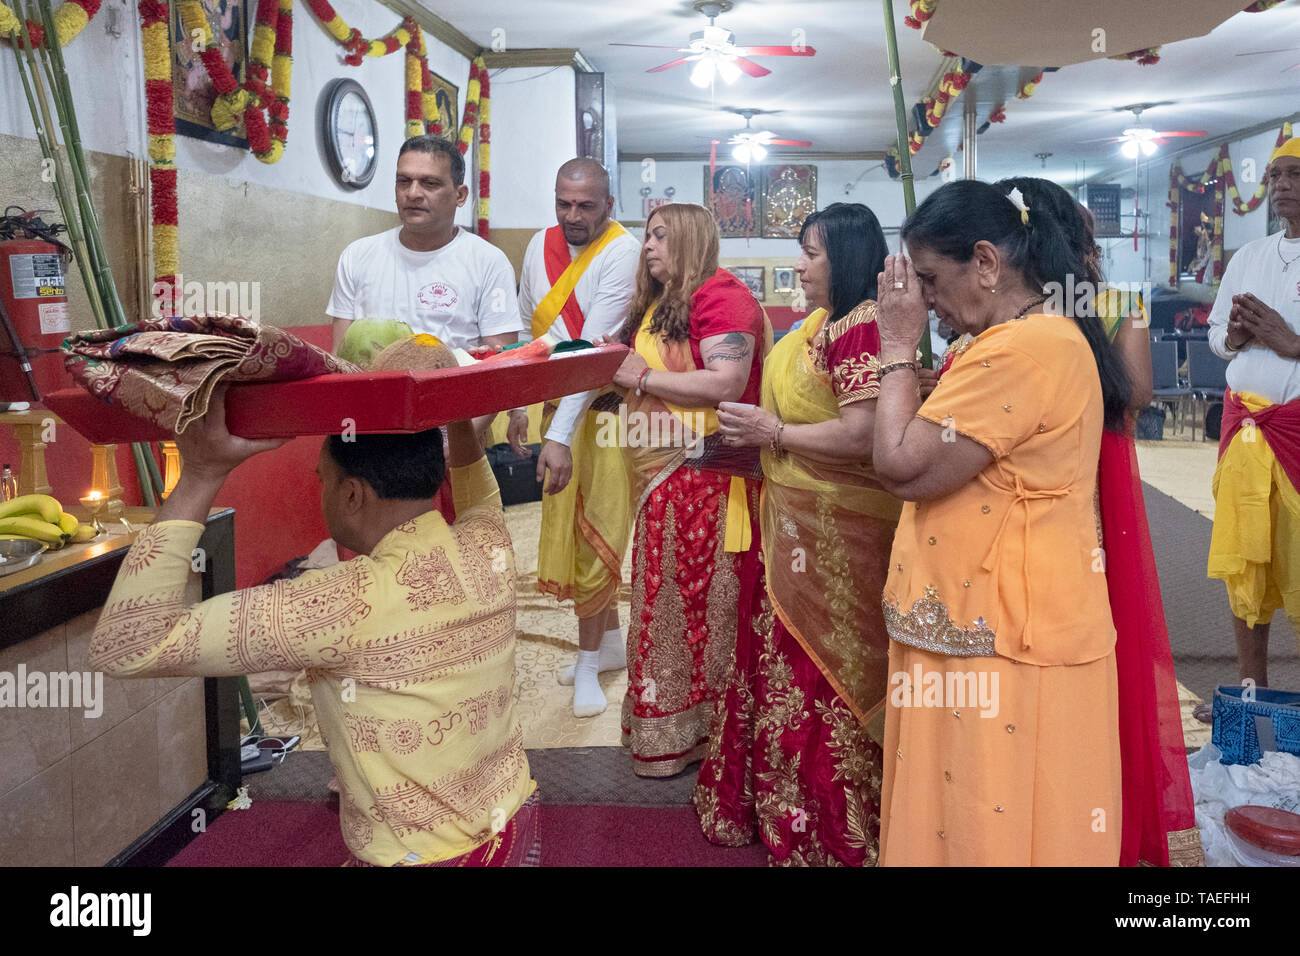 At his mother's thanksgiving service a young Hindu man brings offerings to the deities at a temple in Ozone Park, Queens, New York City. Stock Photo